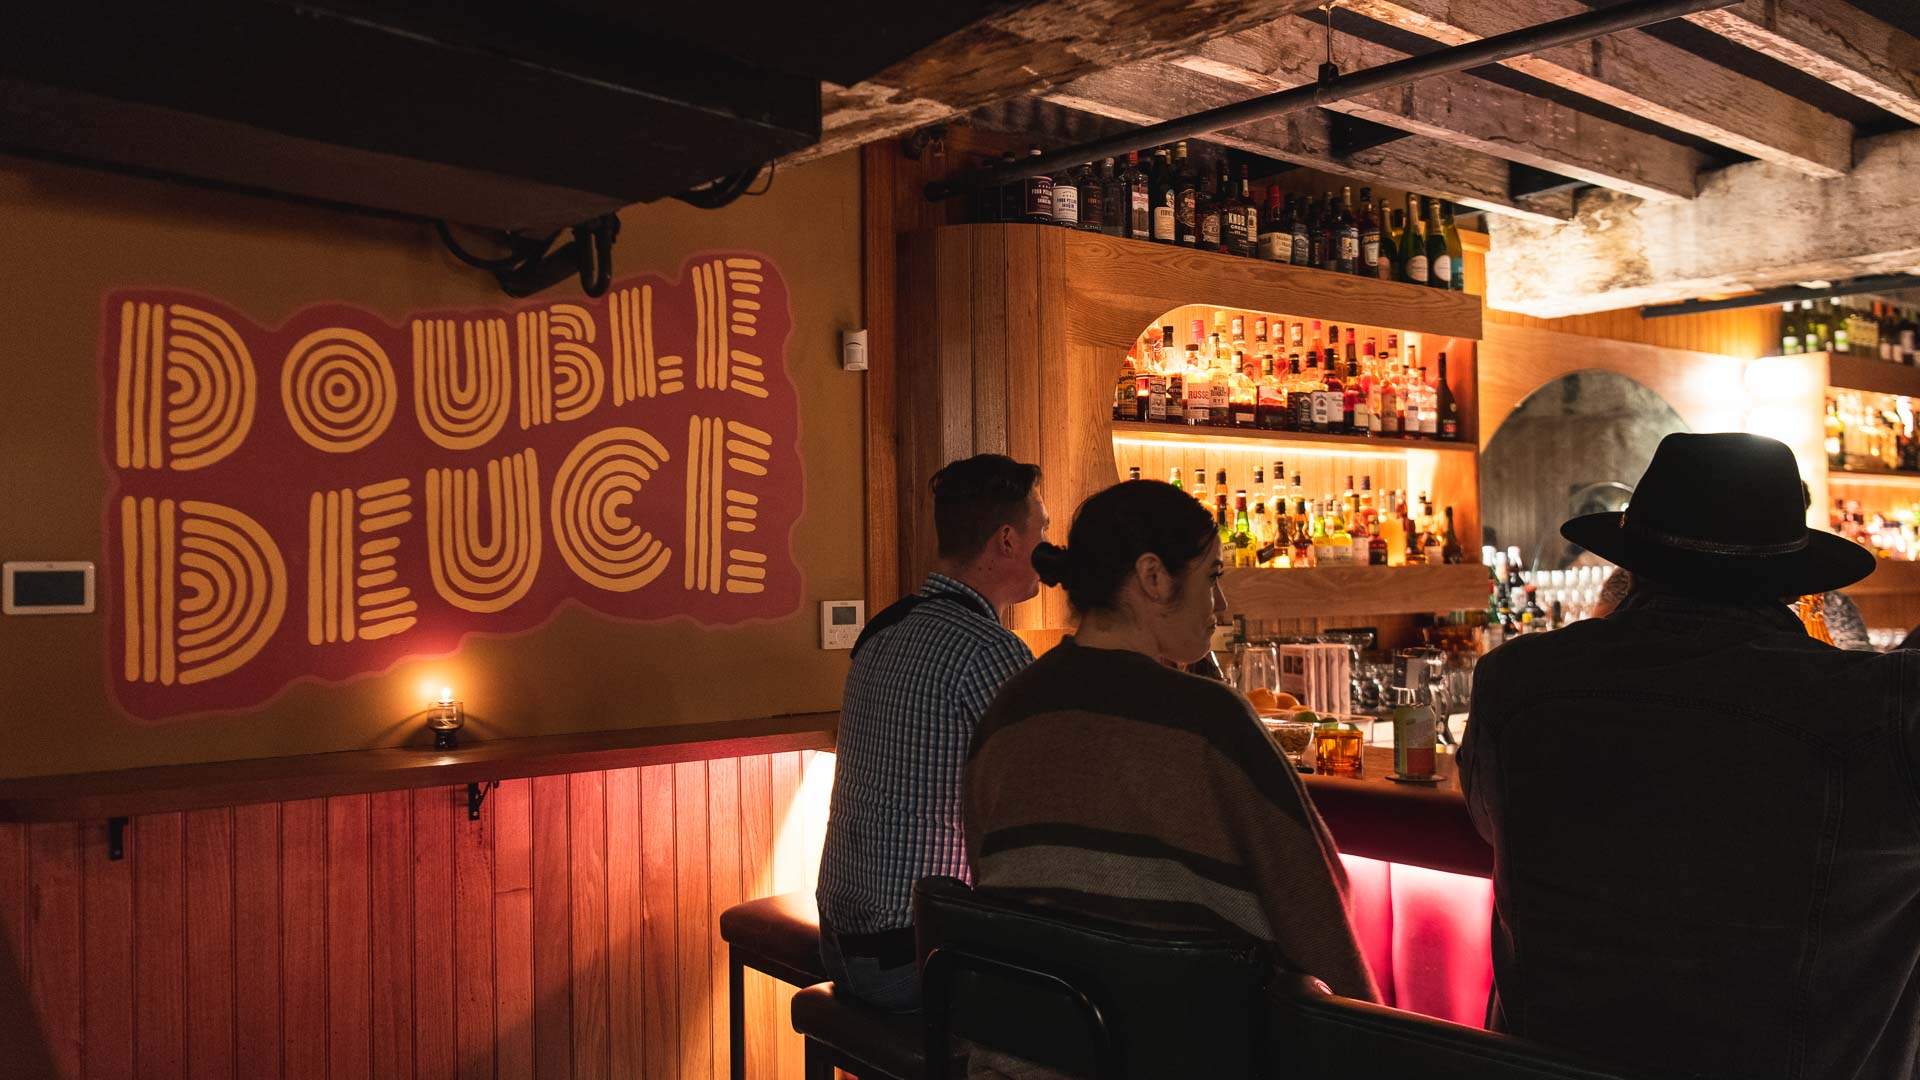 Double Deuce Lounge Is the New '70s Porn Chic' Underground Bar by the Ramblin' Rascal Crew